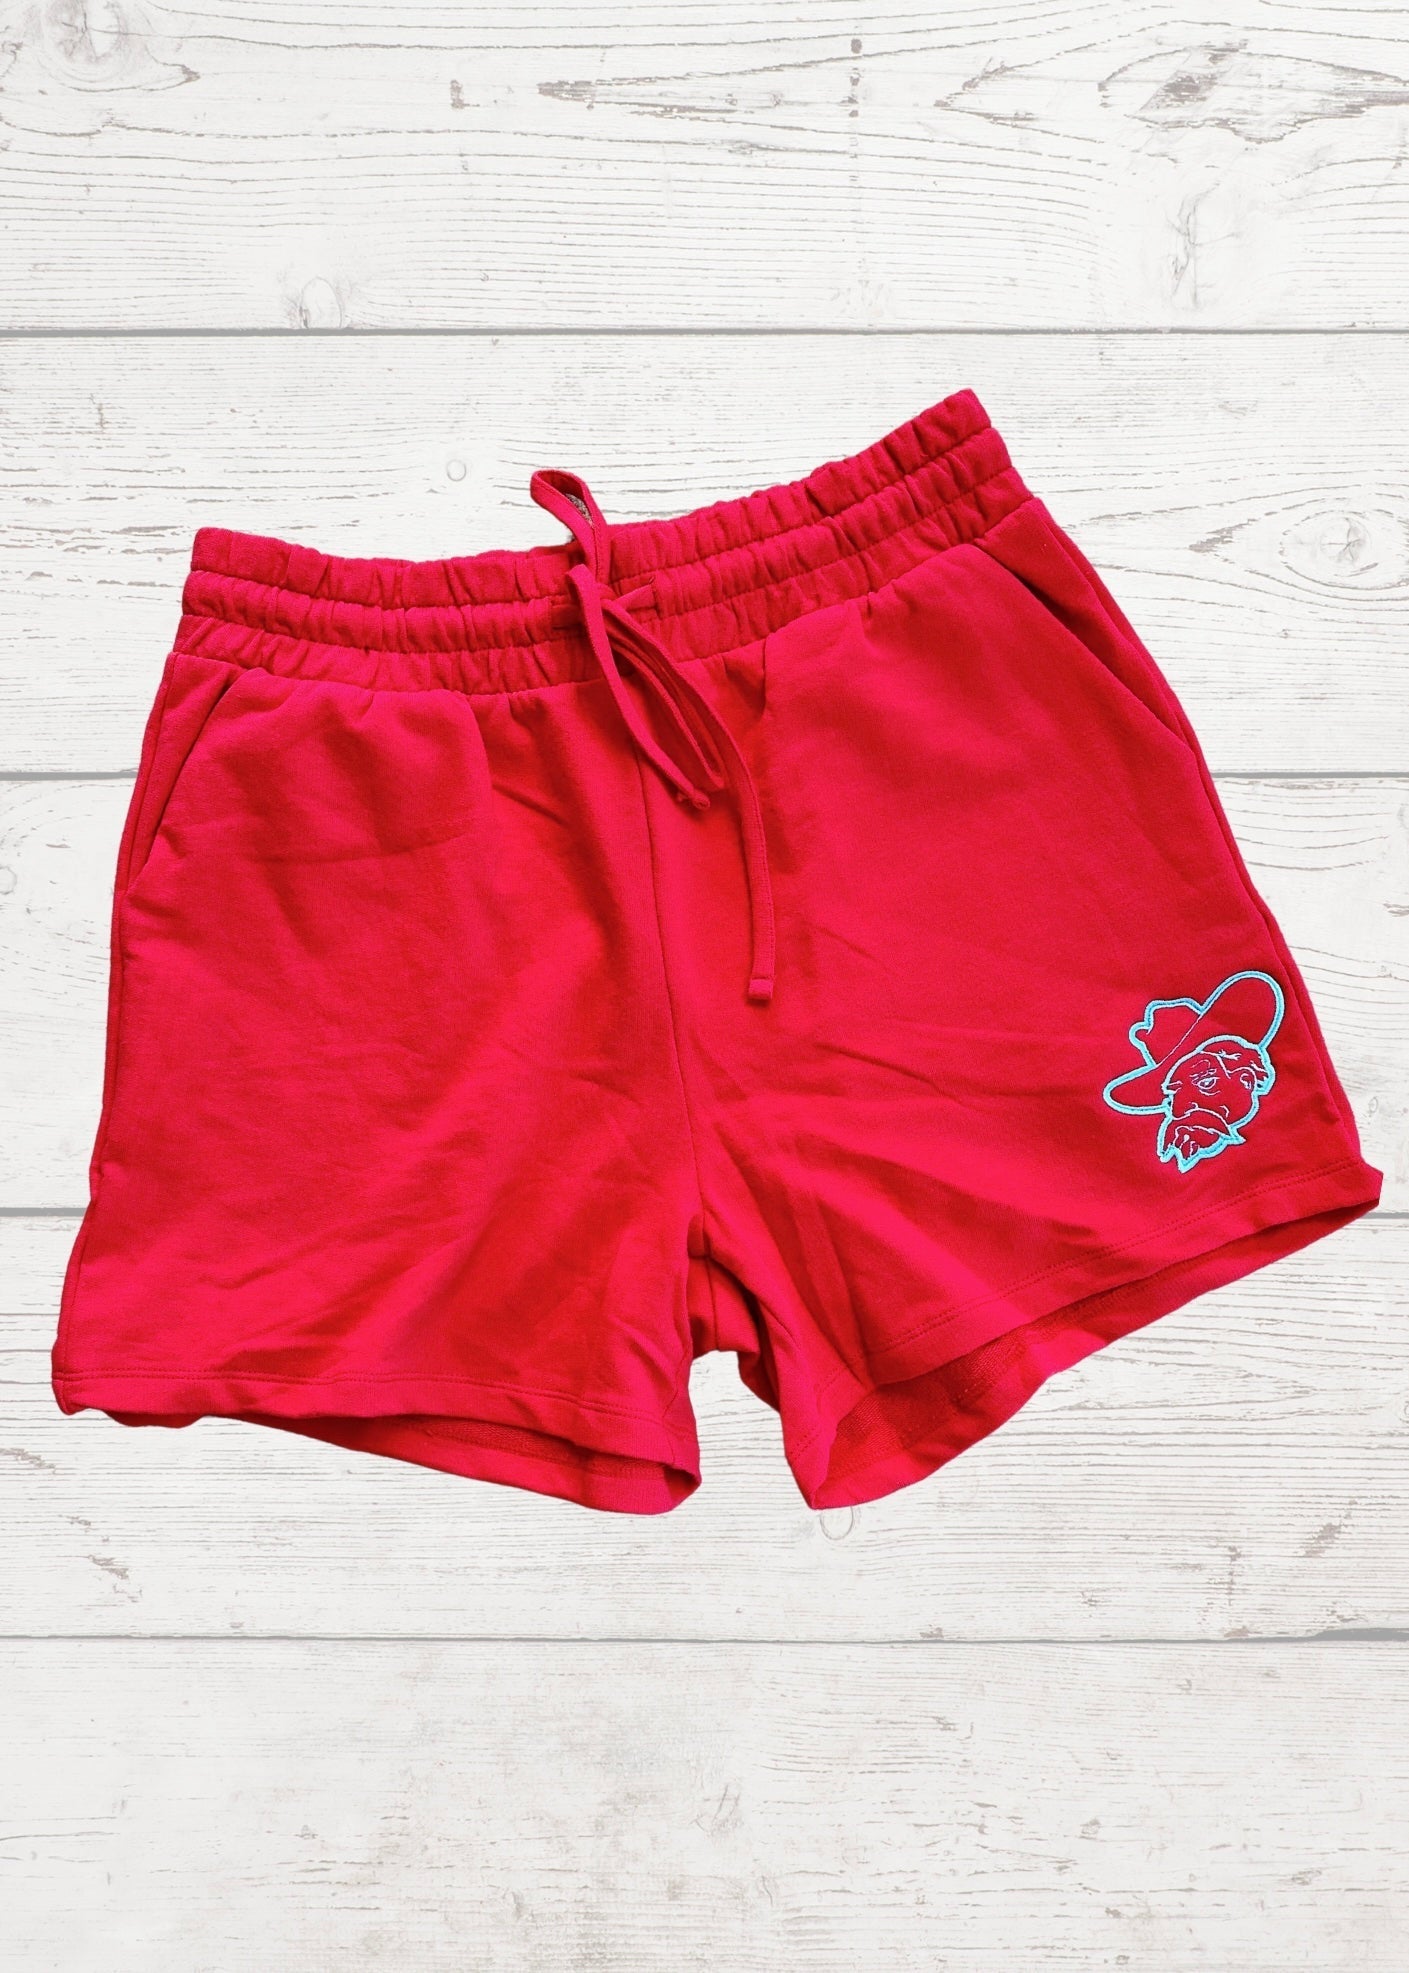 Rebel Embroidered Shorts - Jimberly's Boutique